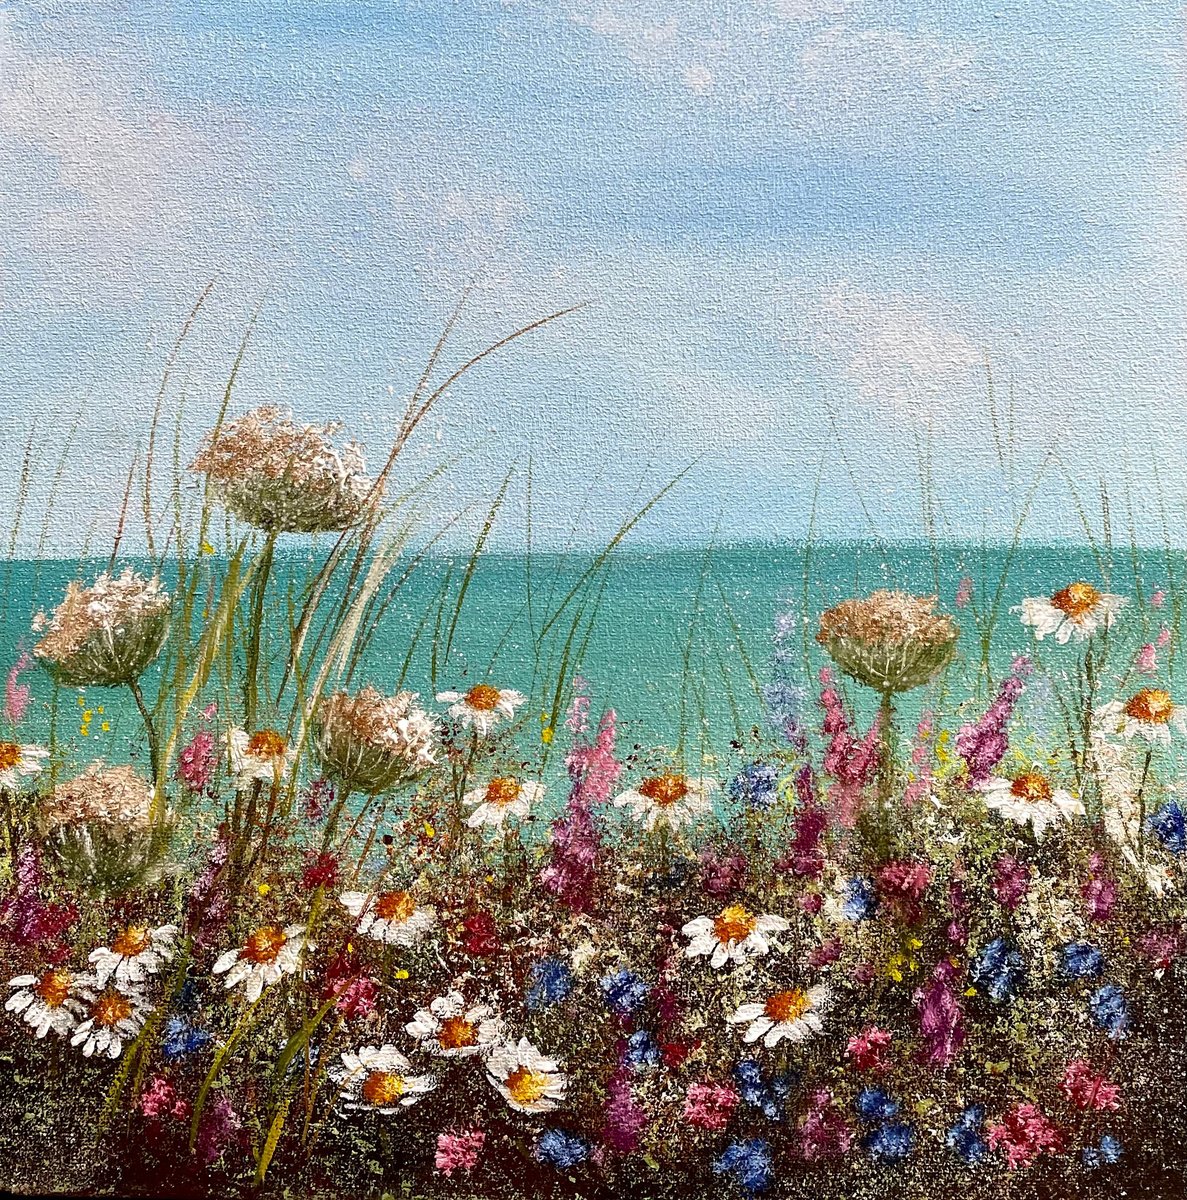 Seaside and meadow flowers by Tanja Frost